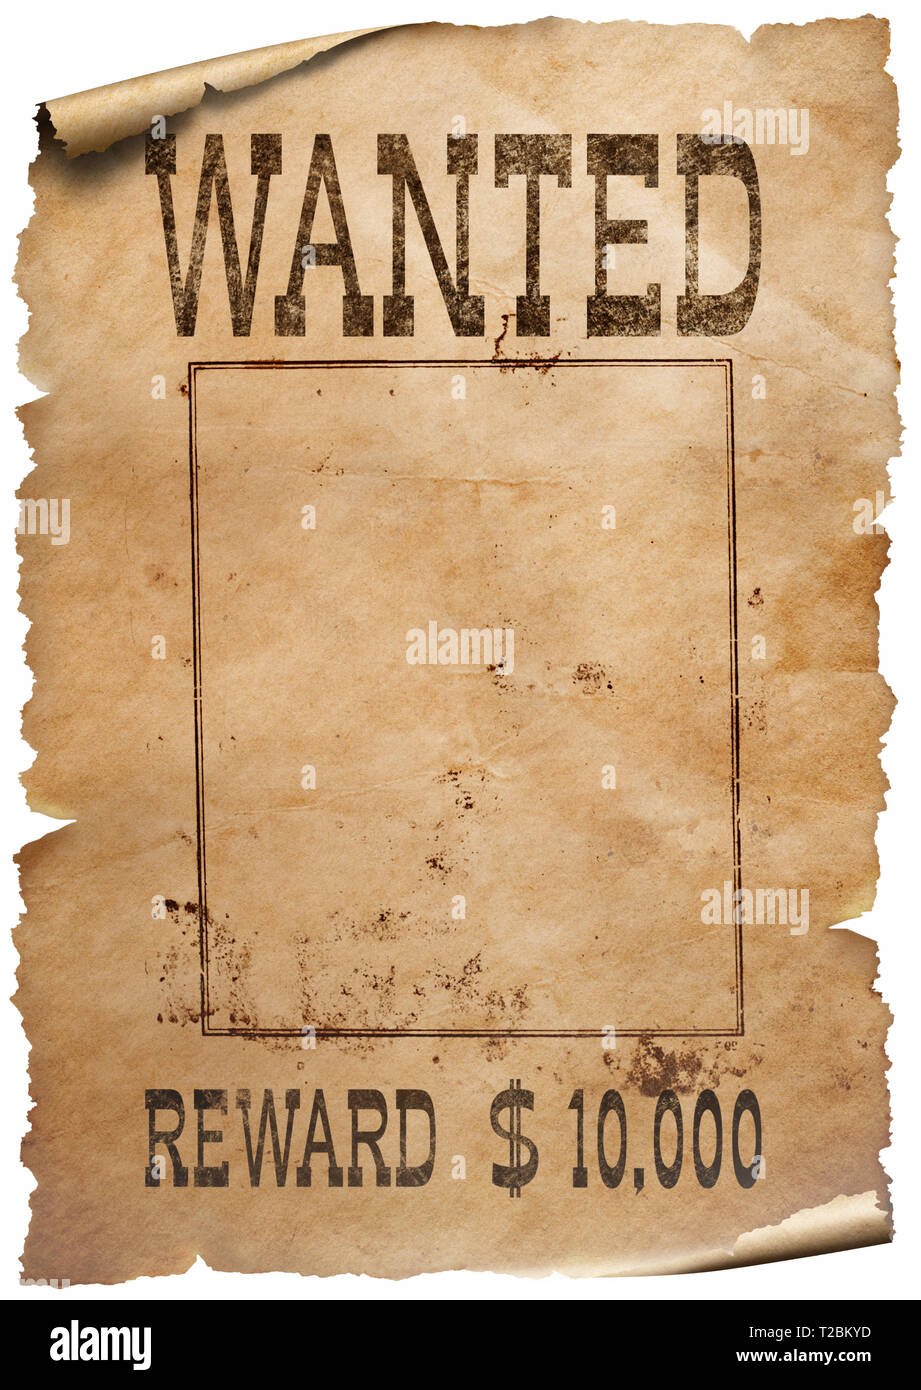 Wanted wild west poster isolated on white background Stock Photo - Alamy